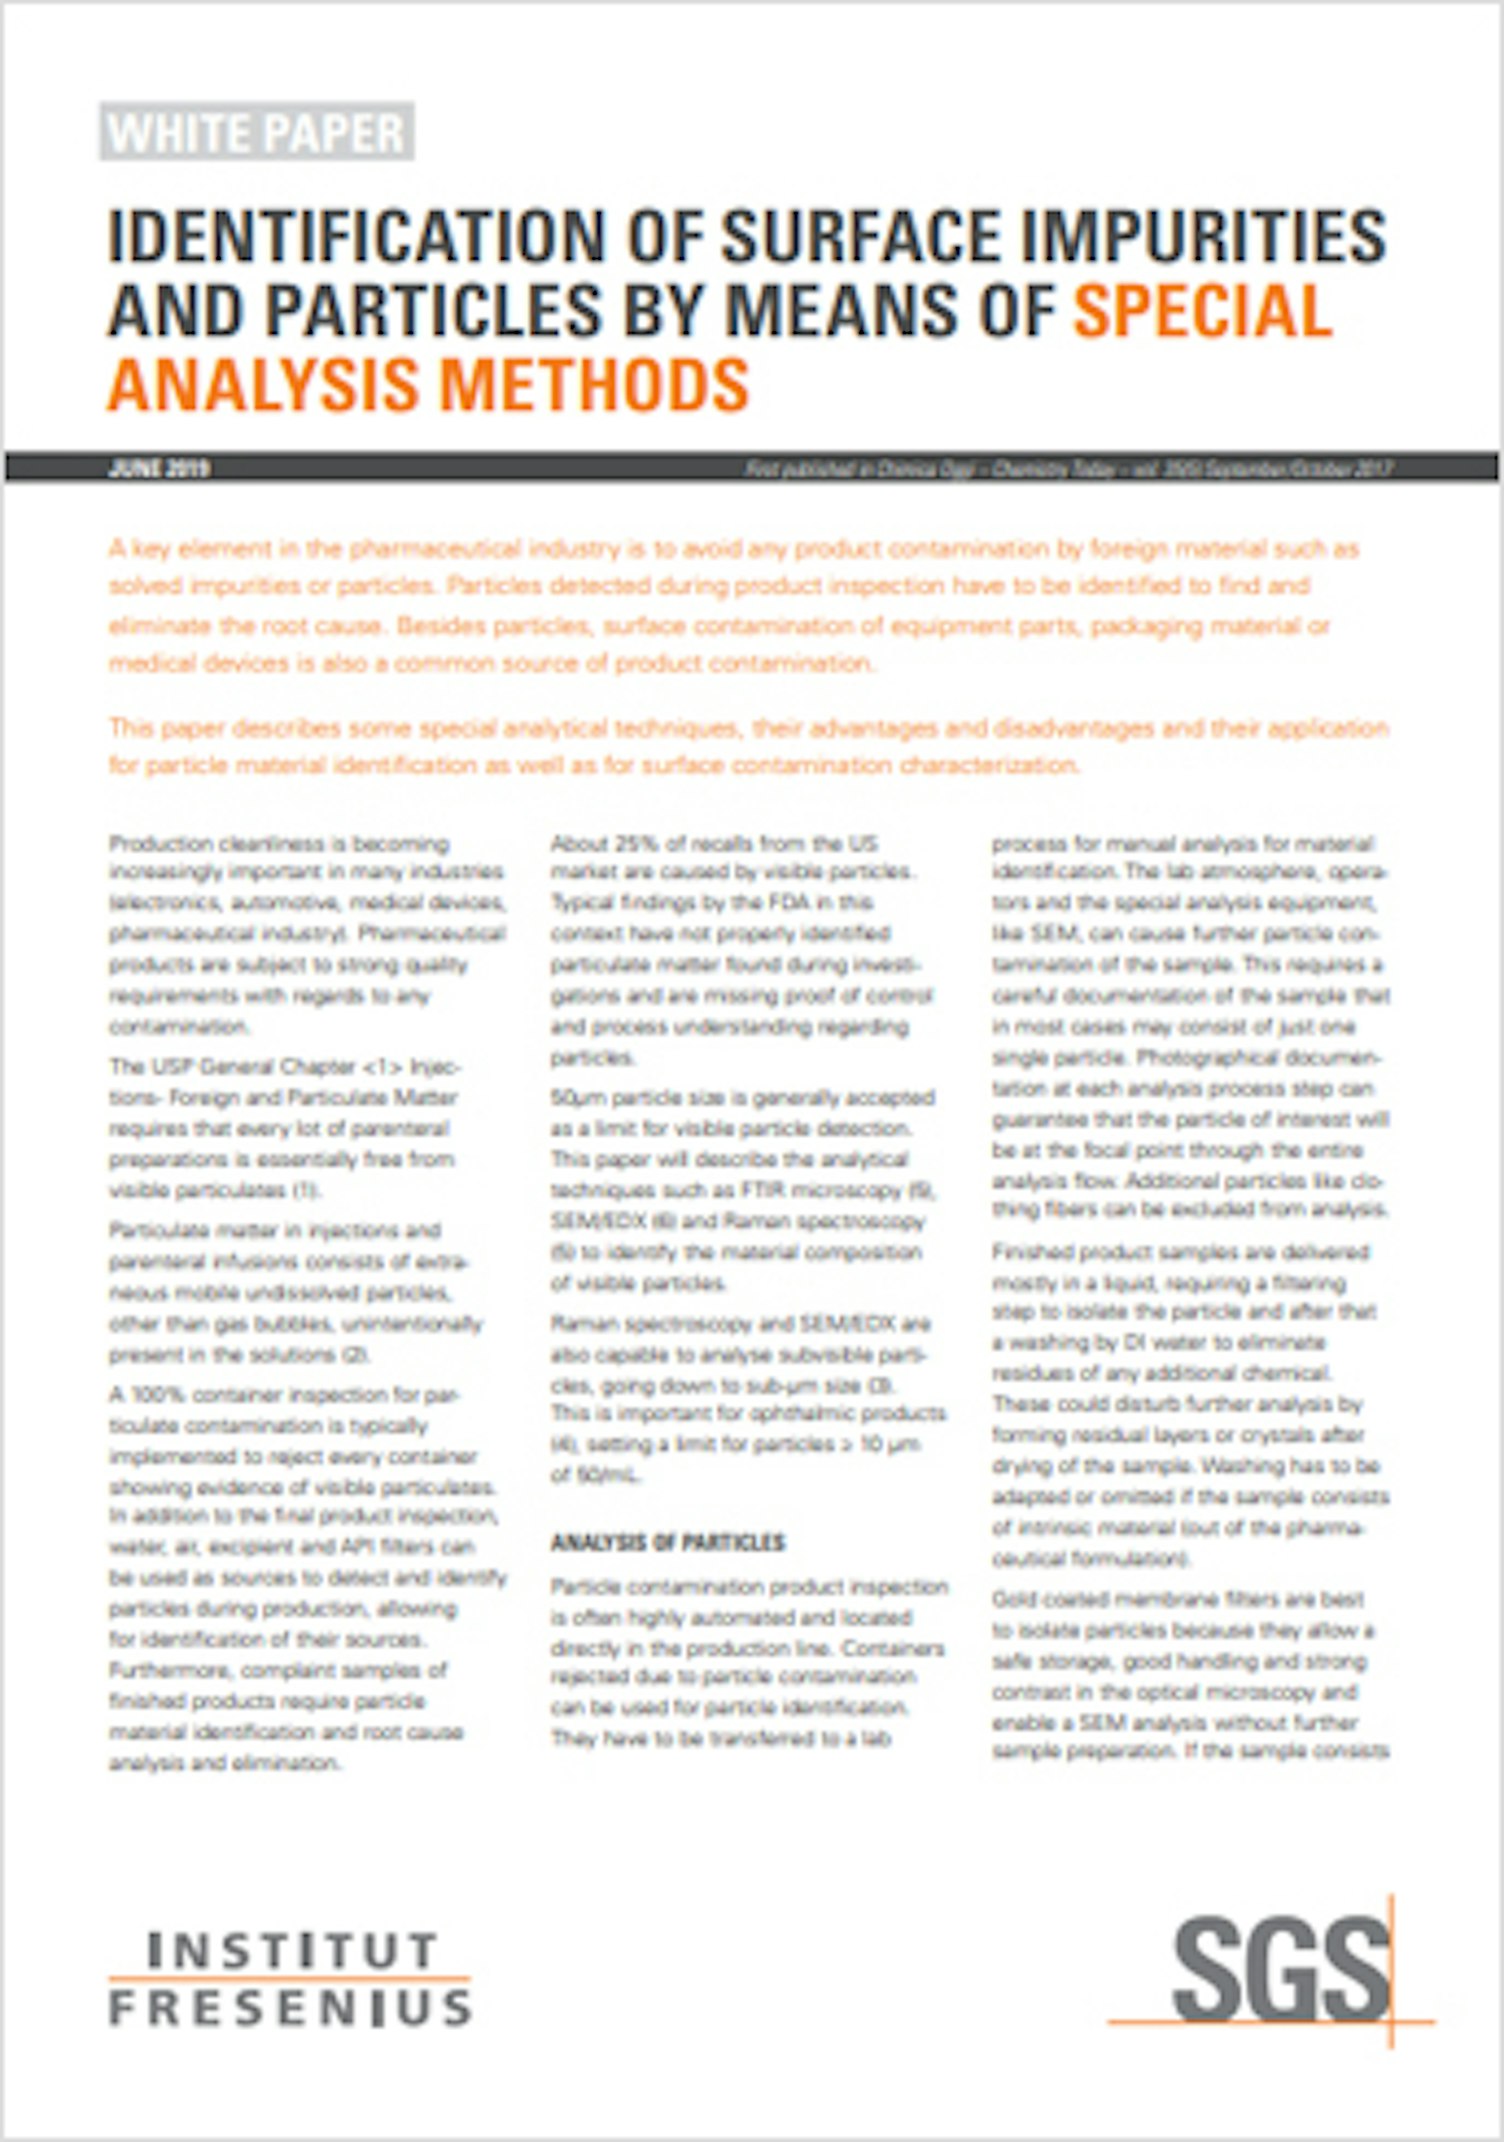 Identification of Surface Impurities and Particles by Means of Special Analysis Methods